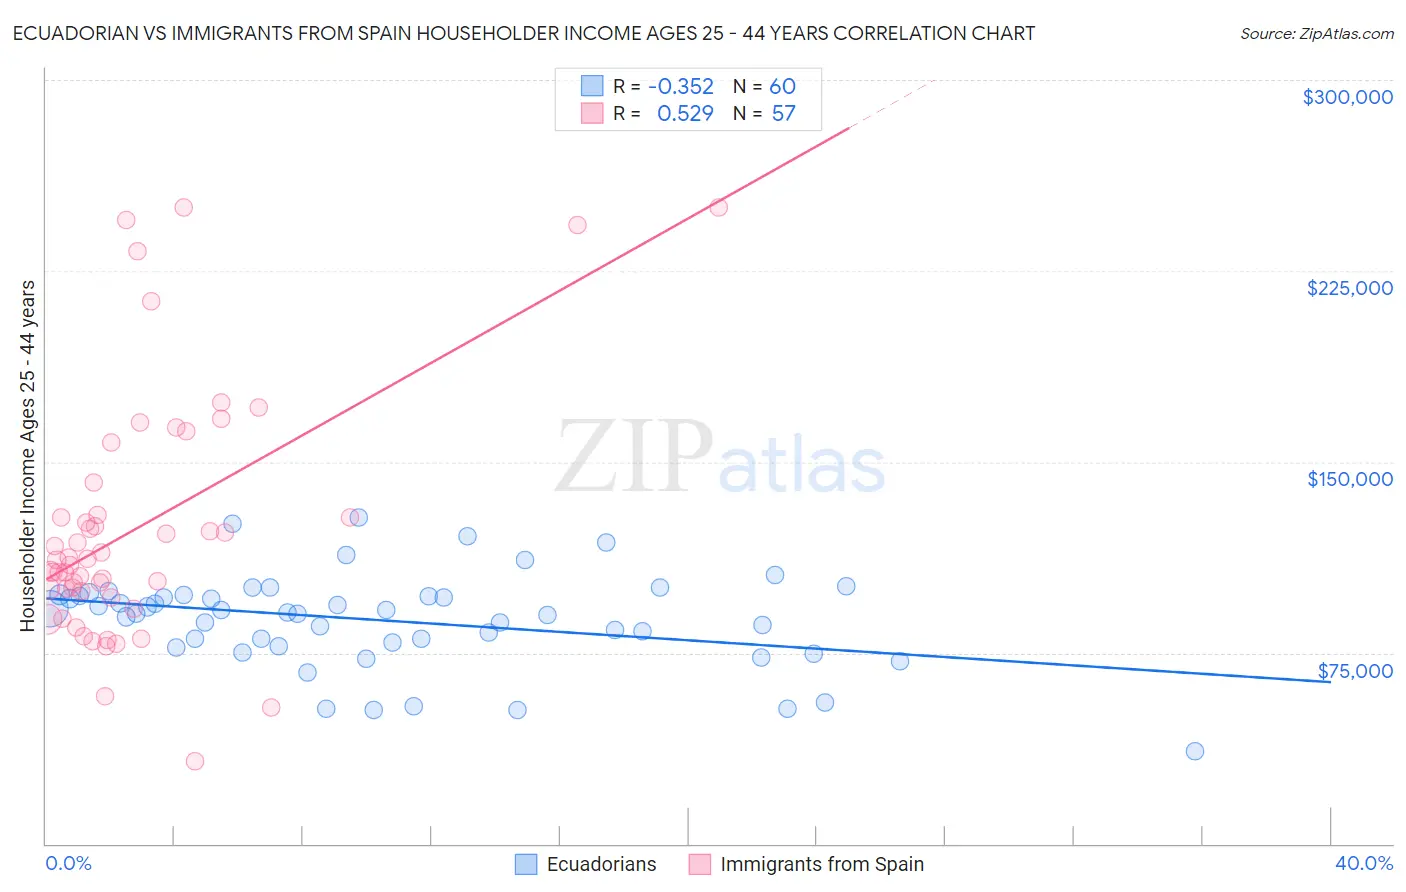 Ecuadorian vs Immigrants from Spain Householder Income Ages 25 - 44 years